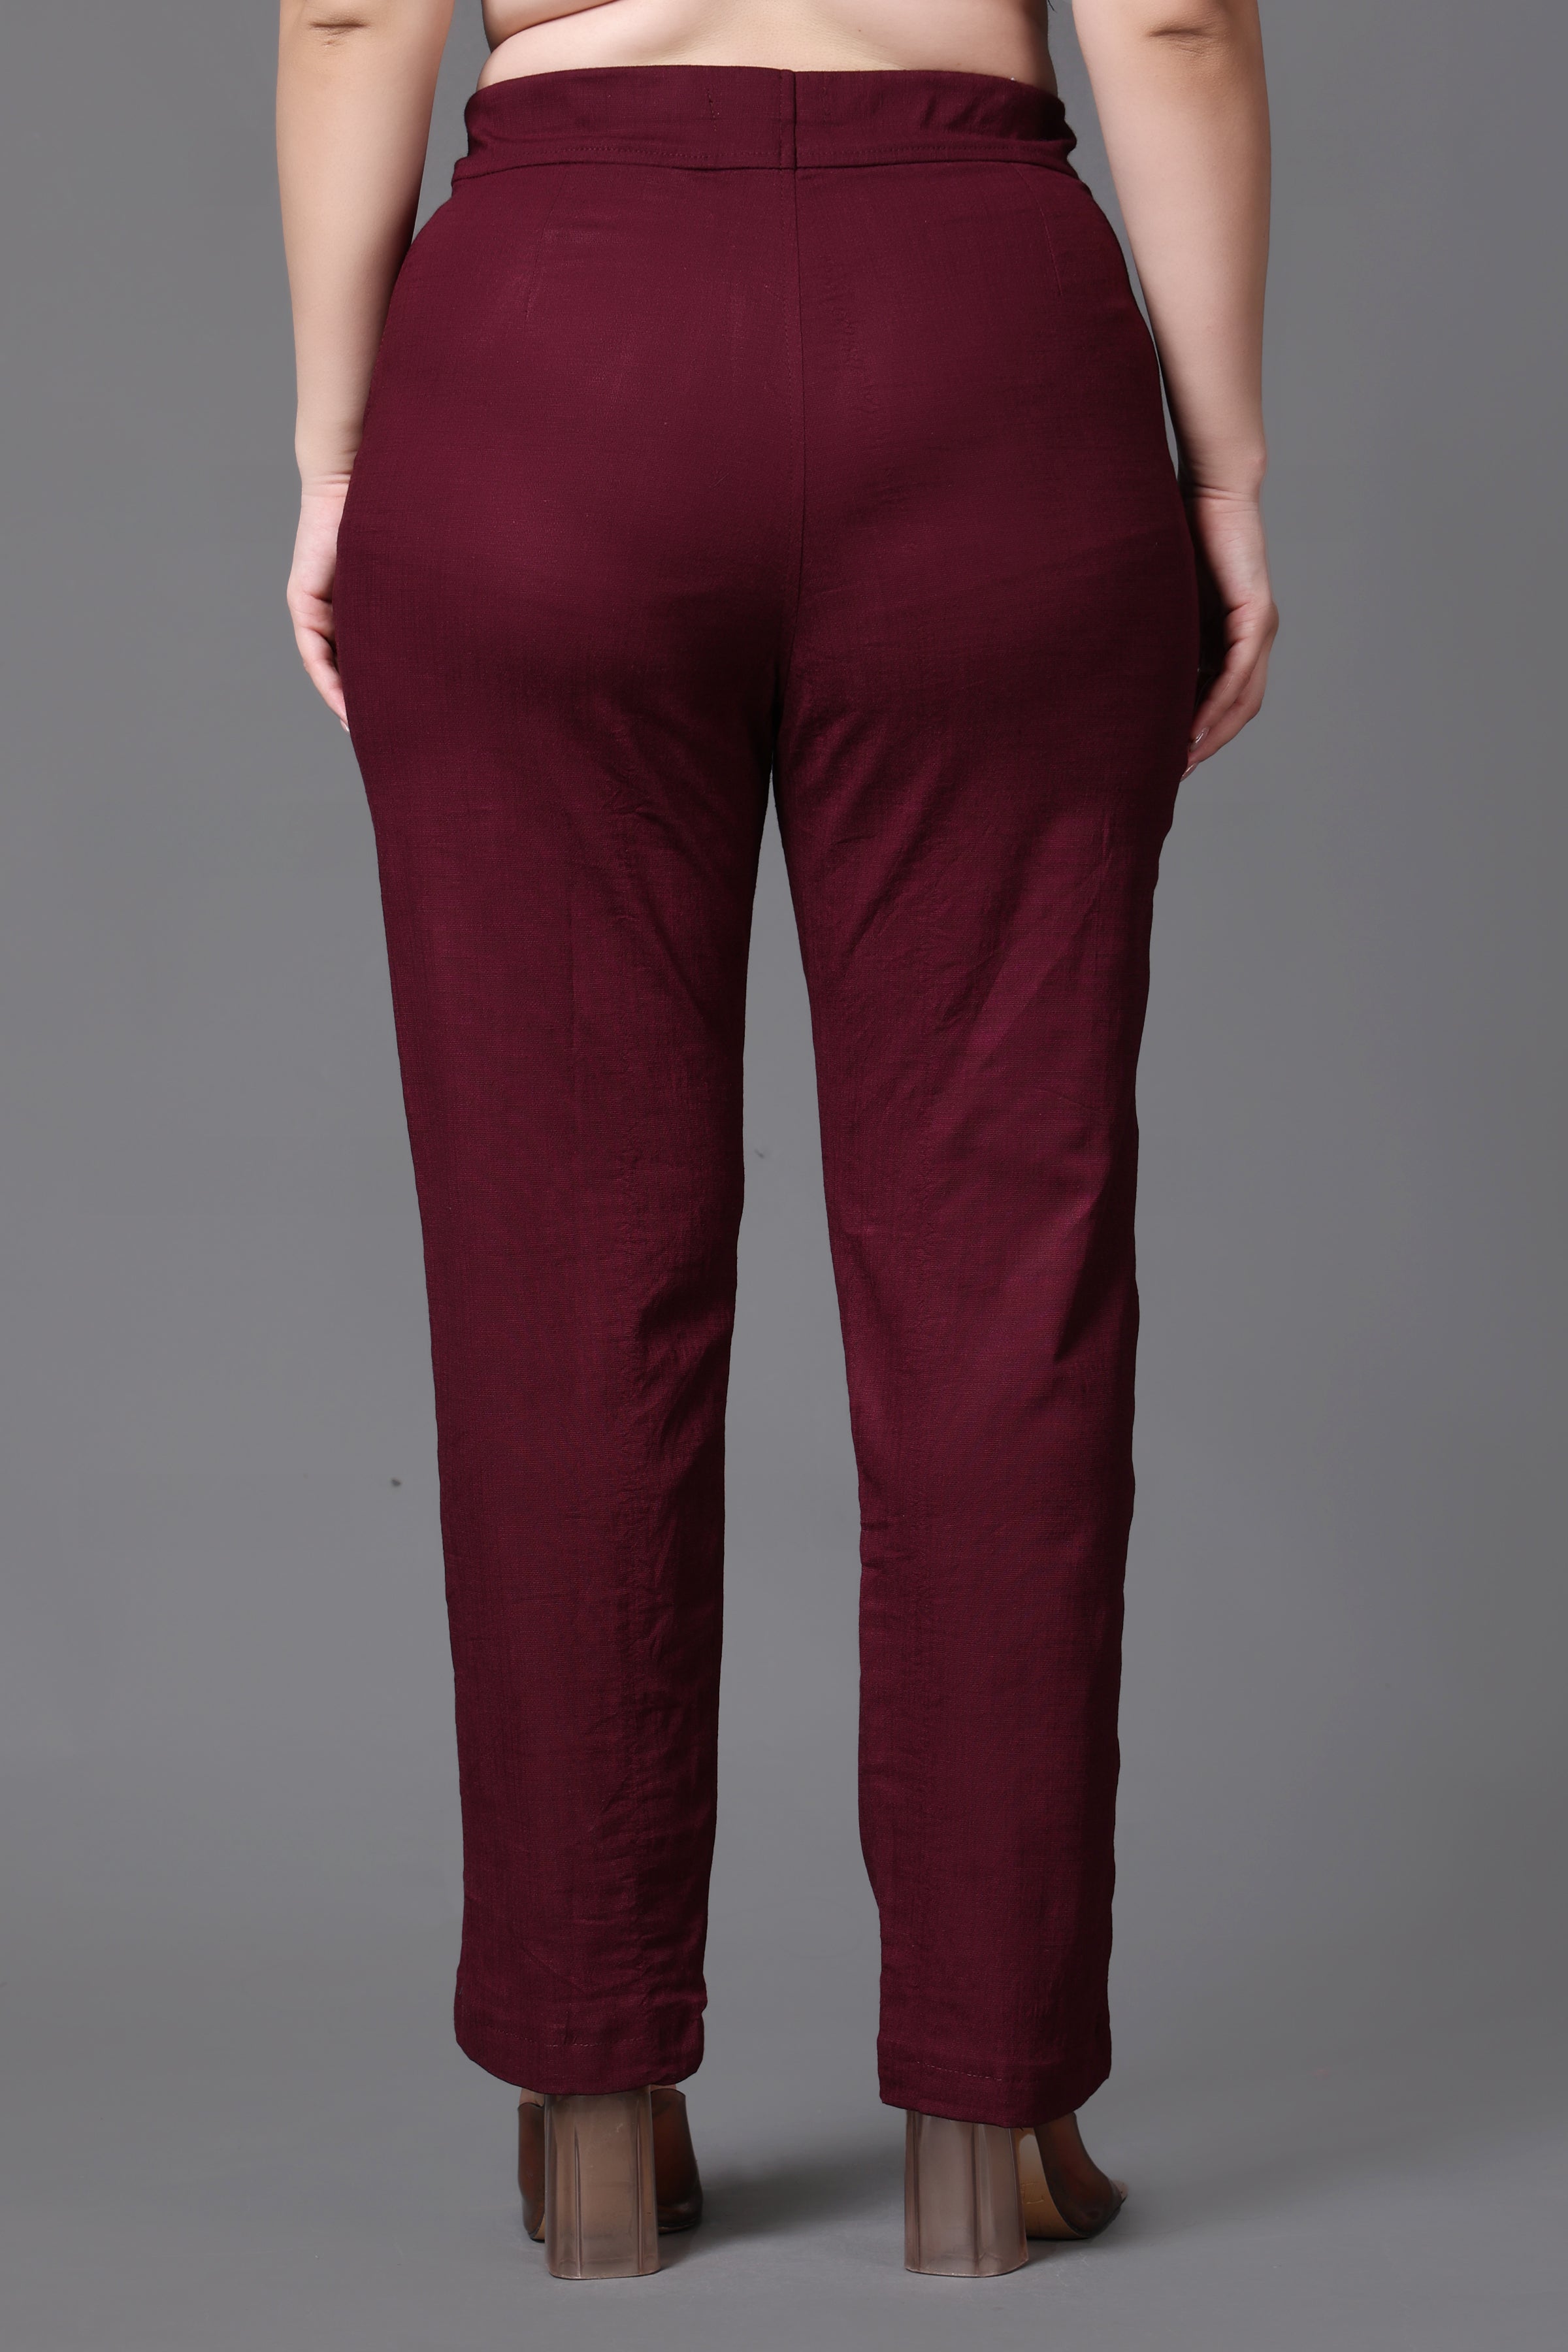 Denim Bottom Wear Ladies Stretchable Lycra Pants, Size: 30-36 at Rs  285/piece in Jaipur